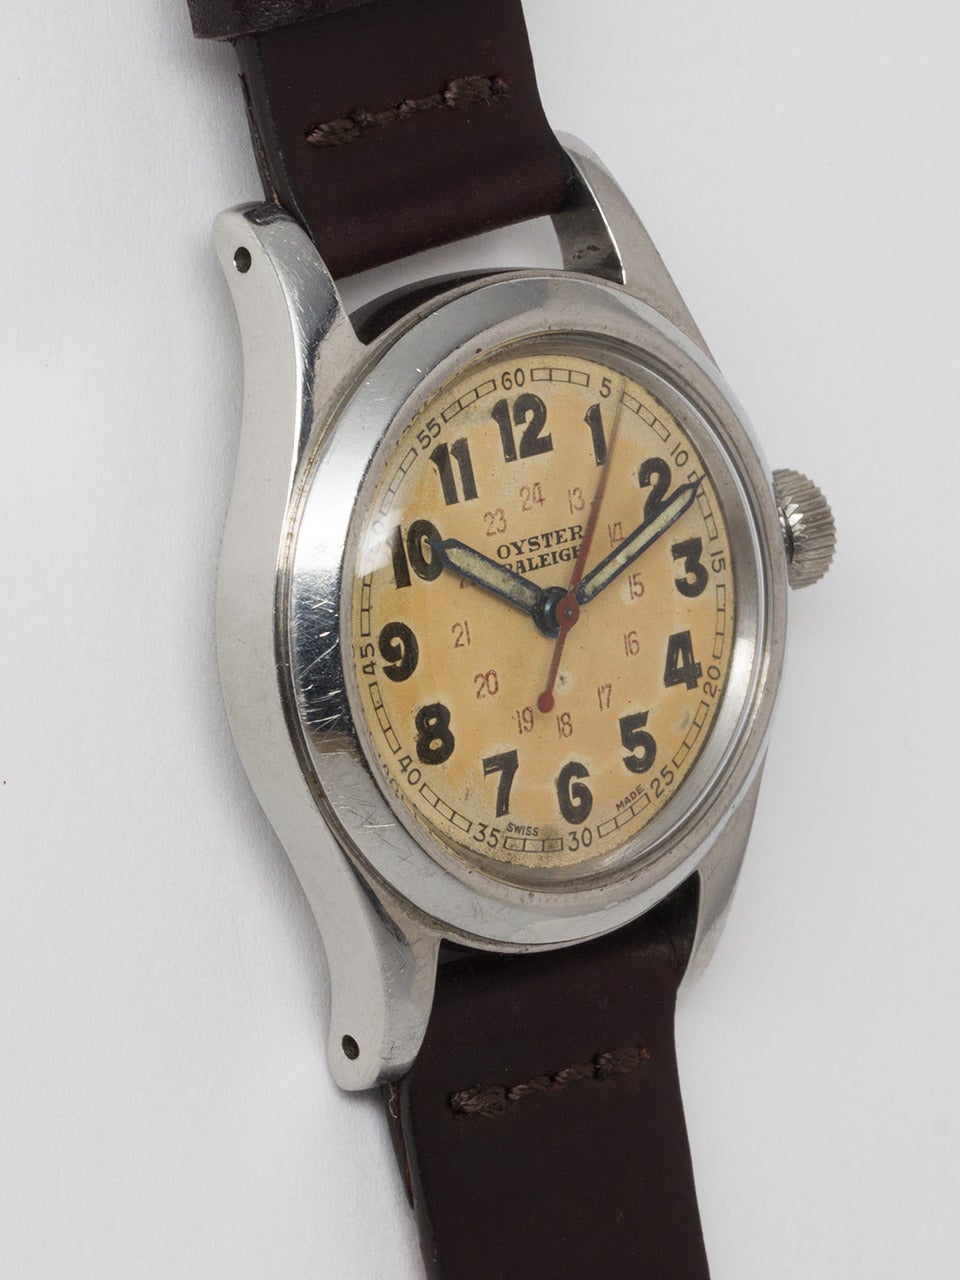 Rolex Oyster Raleigh Wristwatch serial # 177,xxx circa 1944. 31mm boy's size model with original period Oyster Patent crown. Very pleasing original lightly patina'd 24 hour luminous dial with luminous Arabic figures, inner red military 24 hour